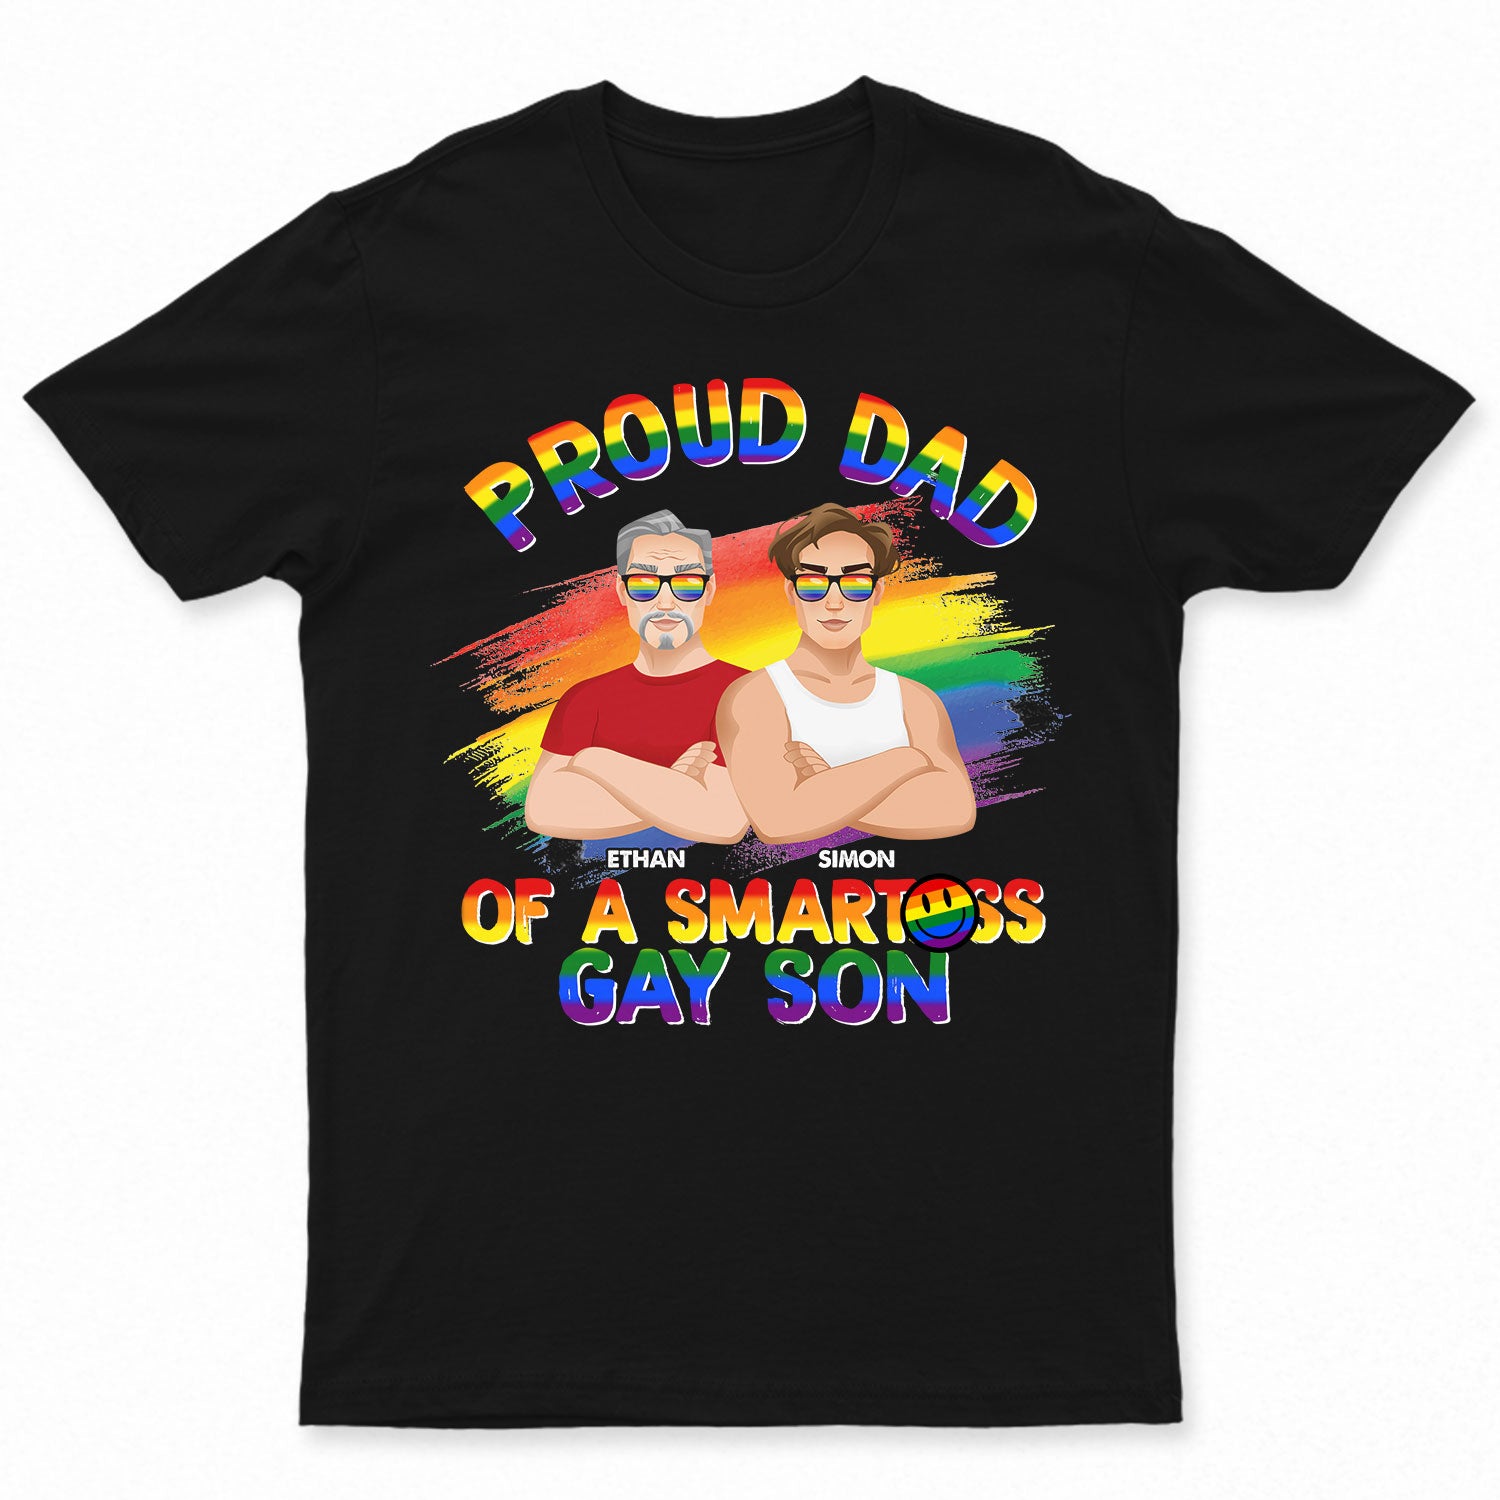 Proud Dad - Personalized T Shirt